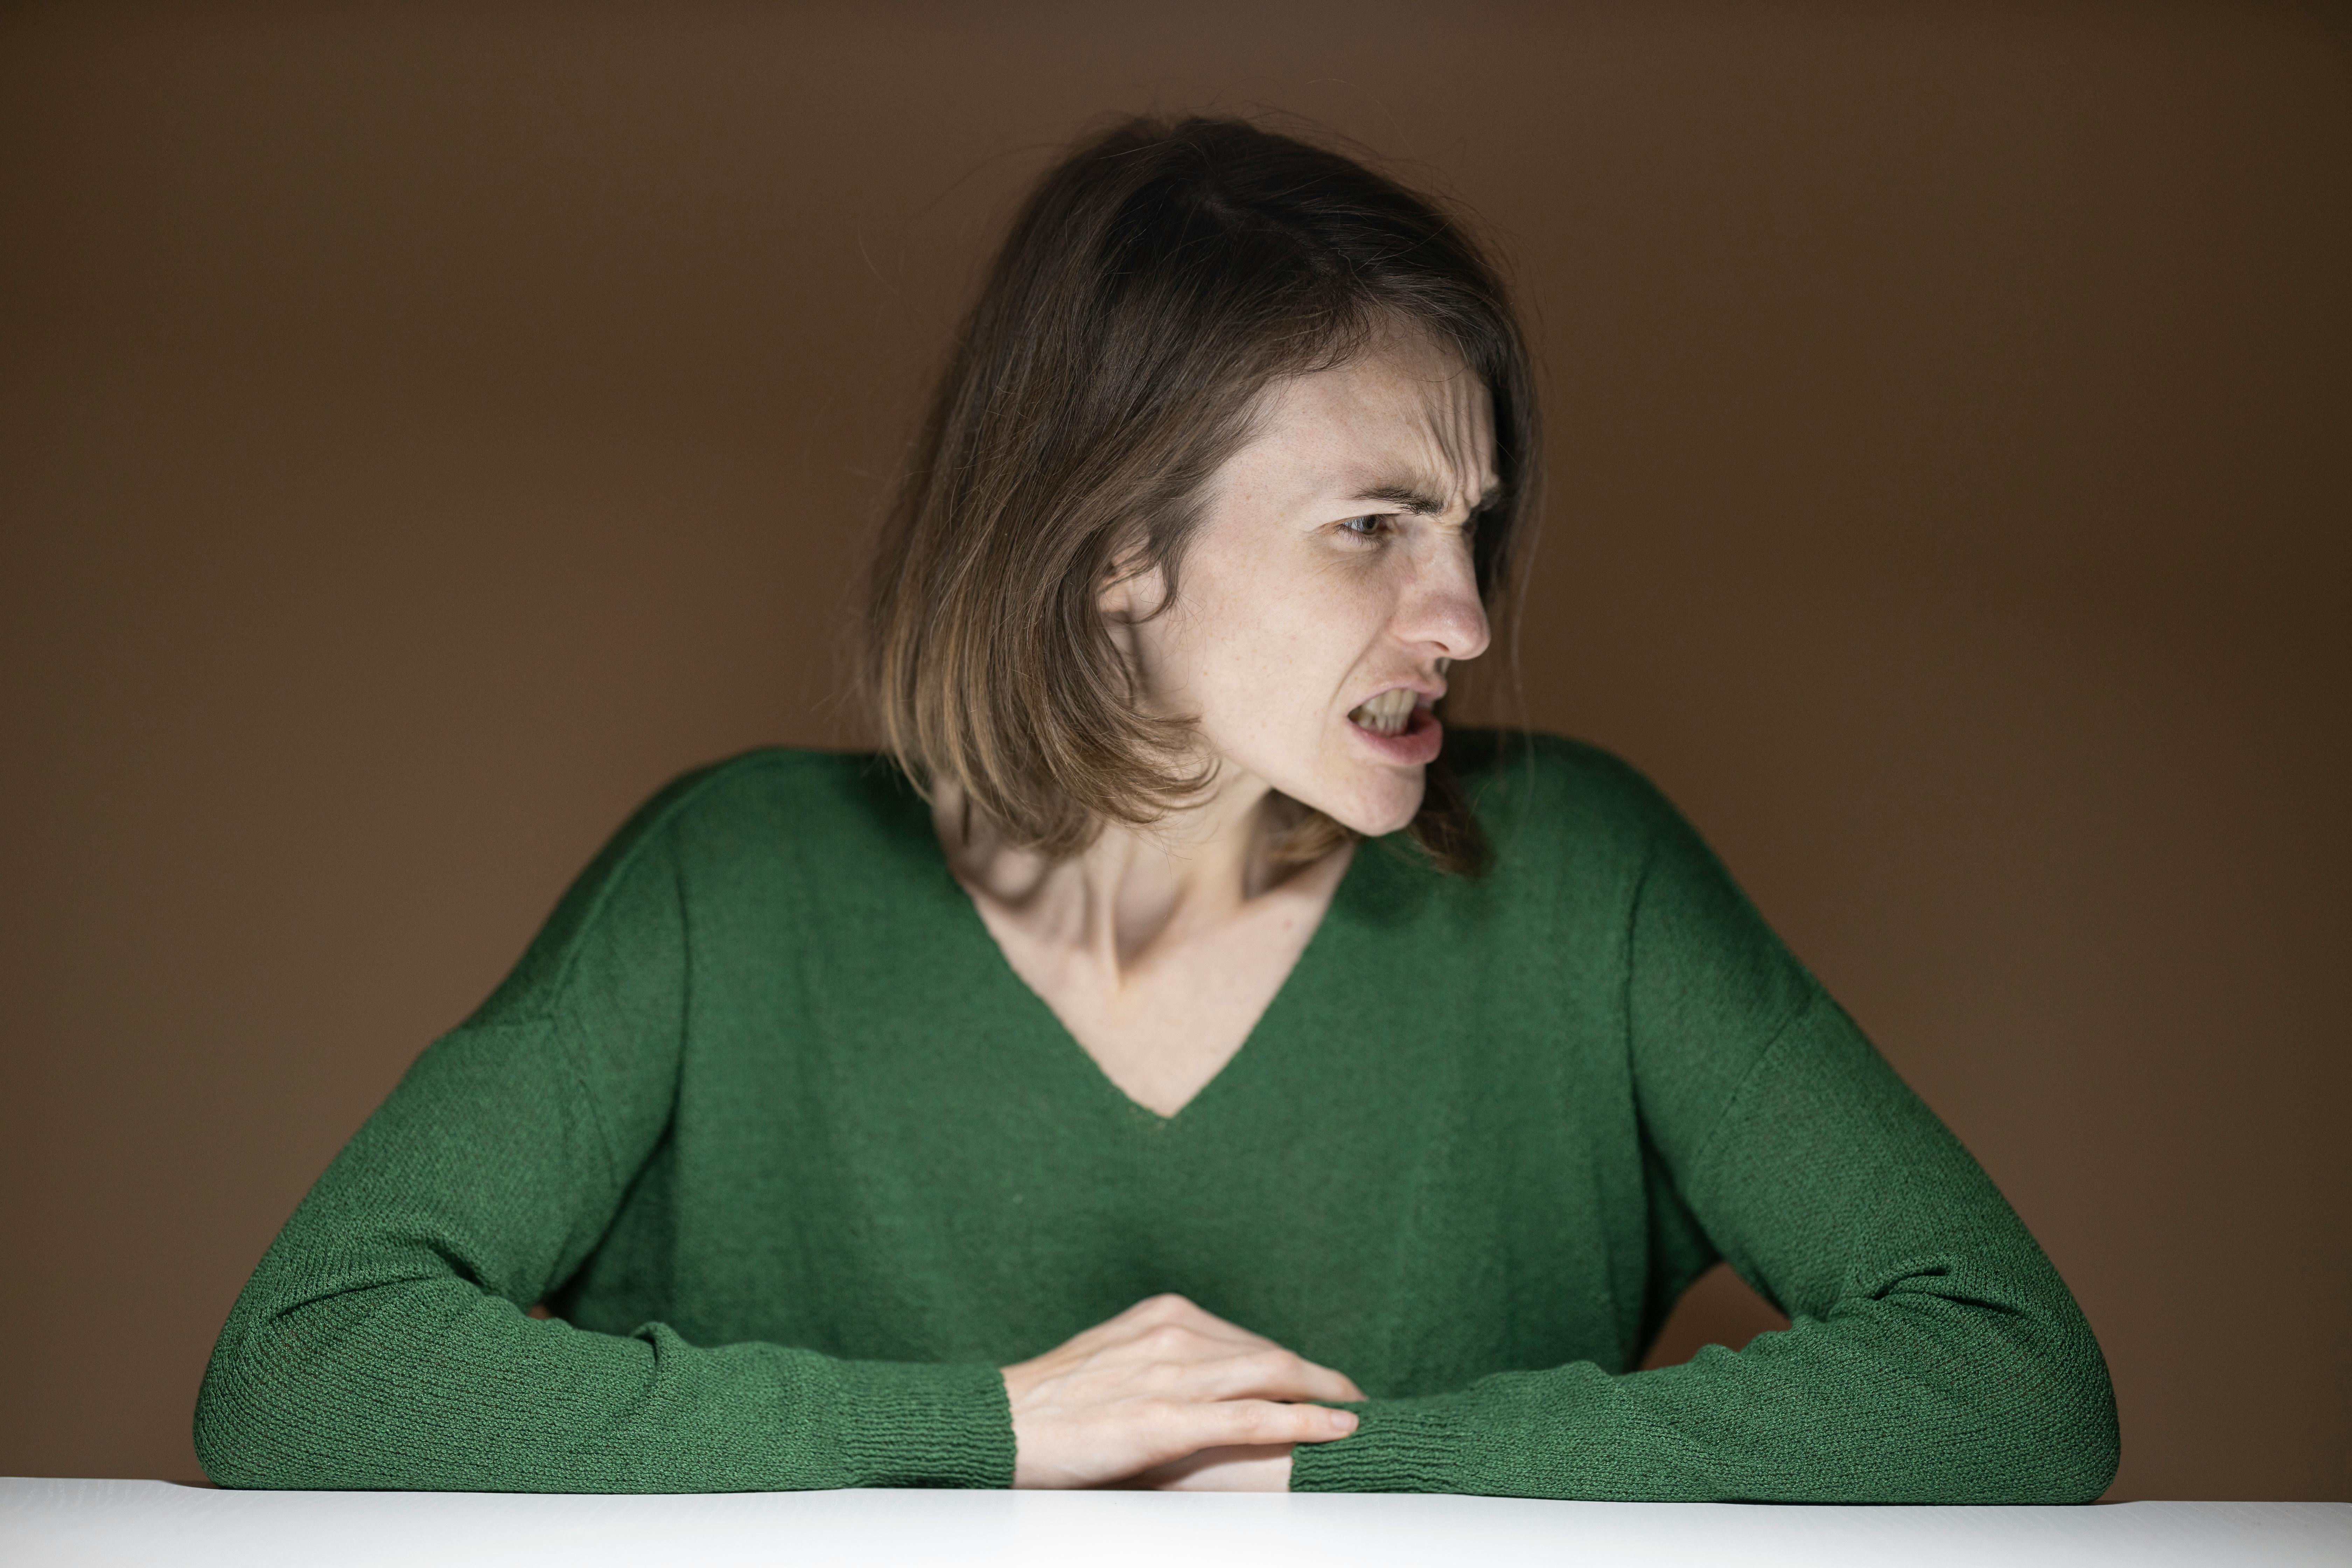 An angry woman reacting to someone | Source: Pexels